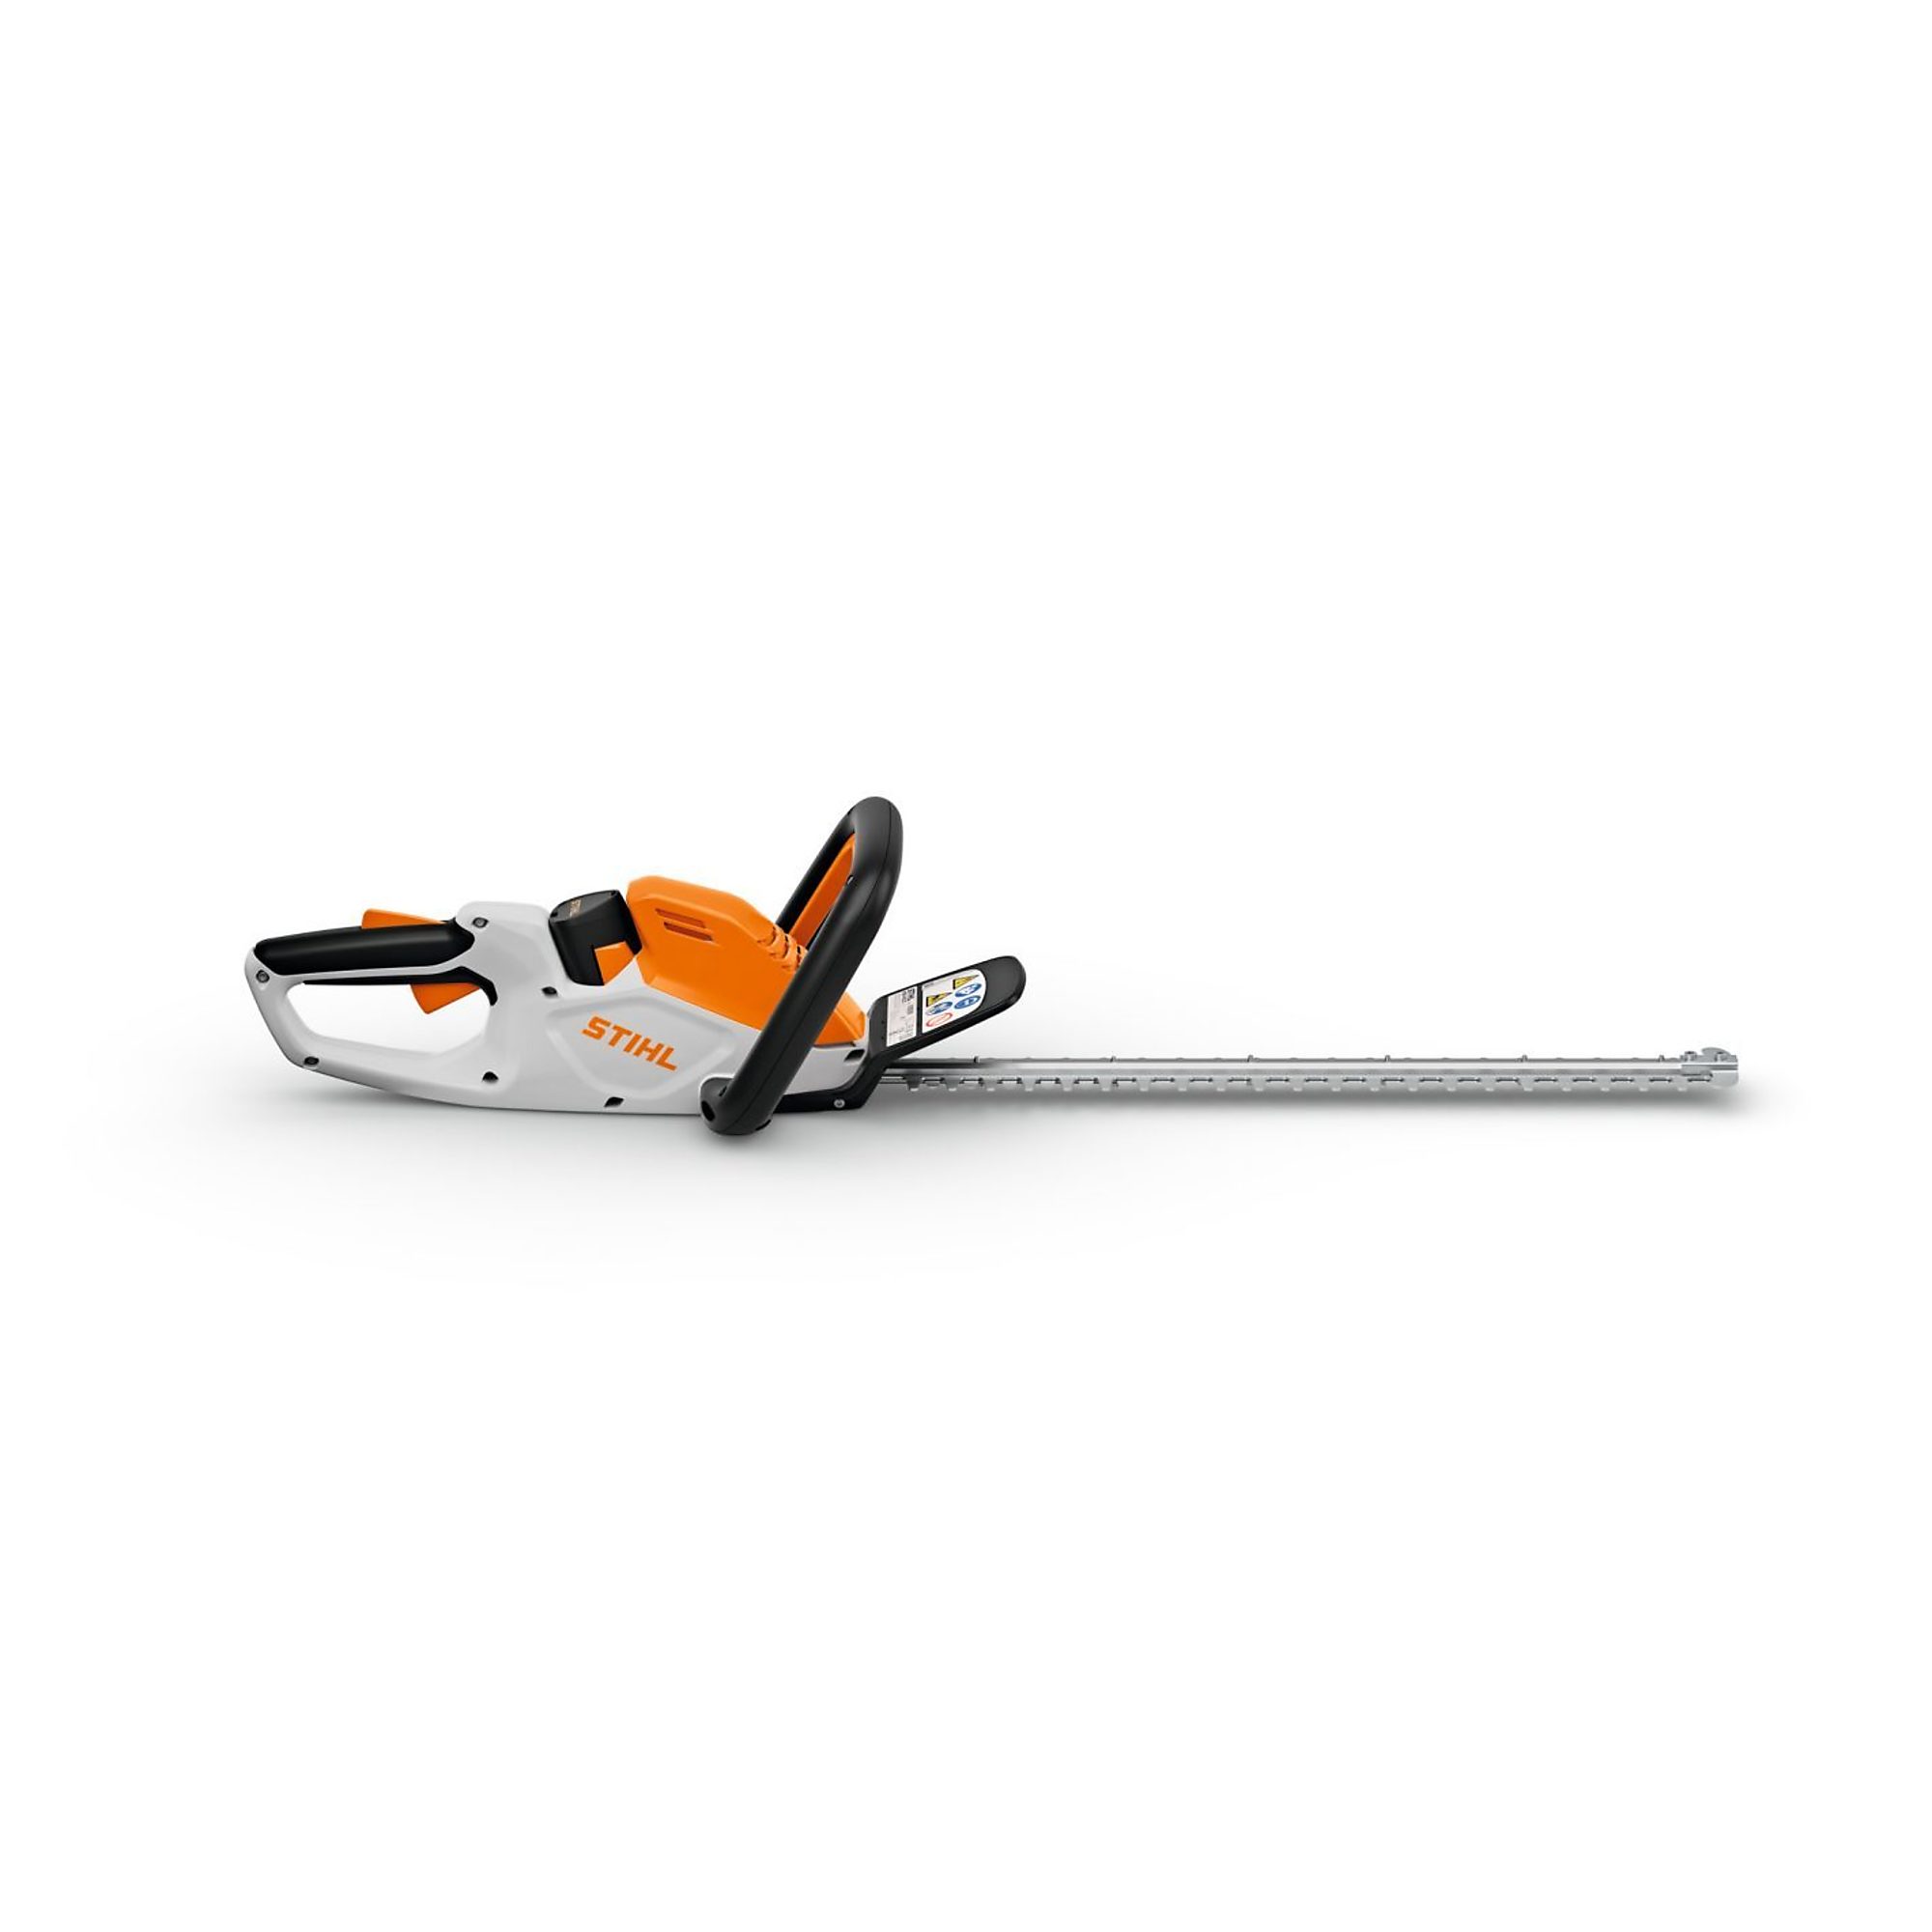 Stihl, Lithium-Ion Hedge Trimmer, Blade Length 18 in, Model HSA 30 SET